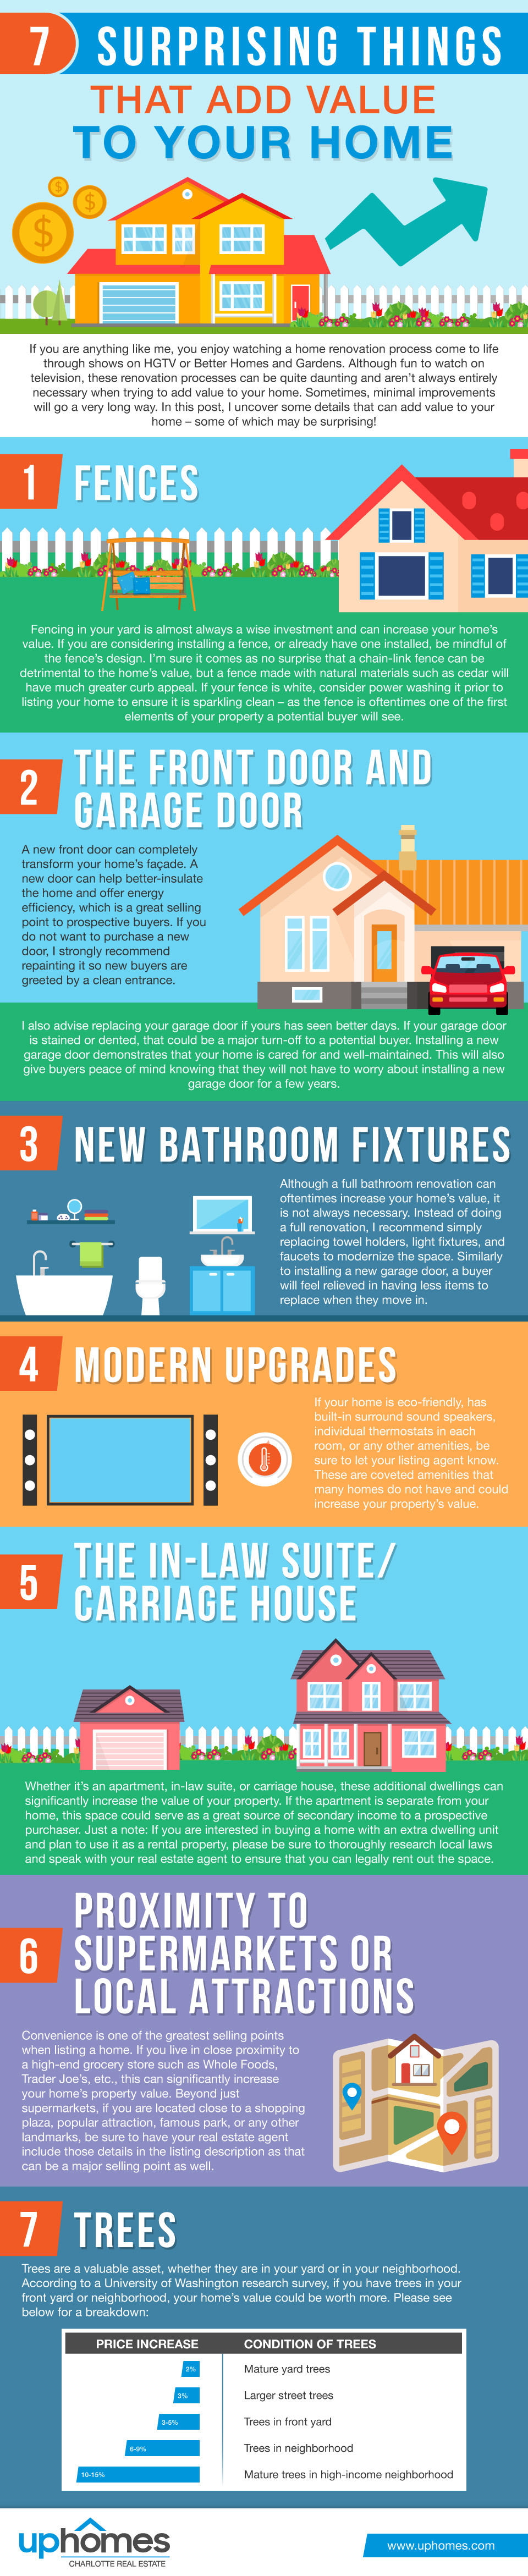 7 Surprising Things That Add Value to Your Home